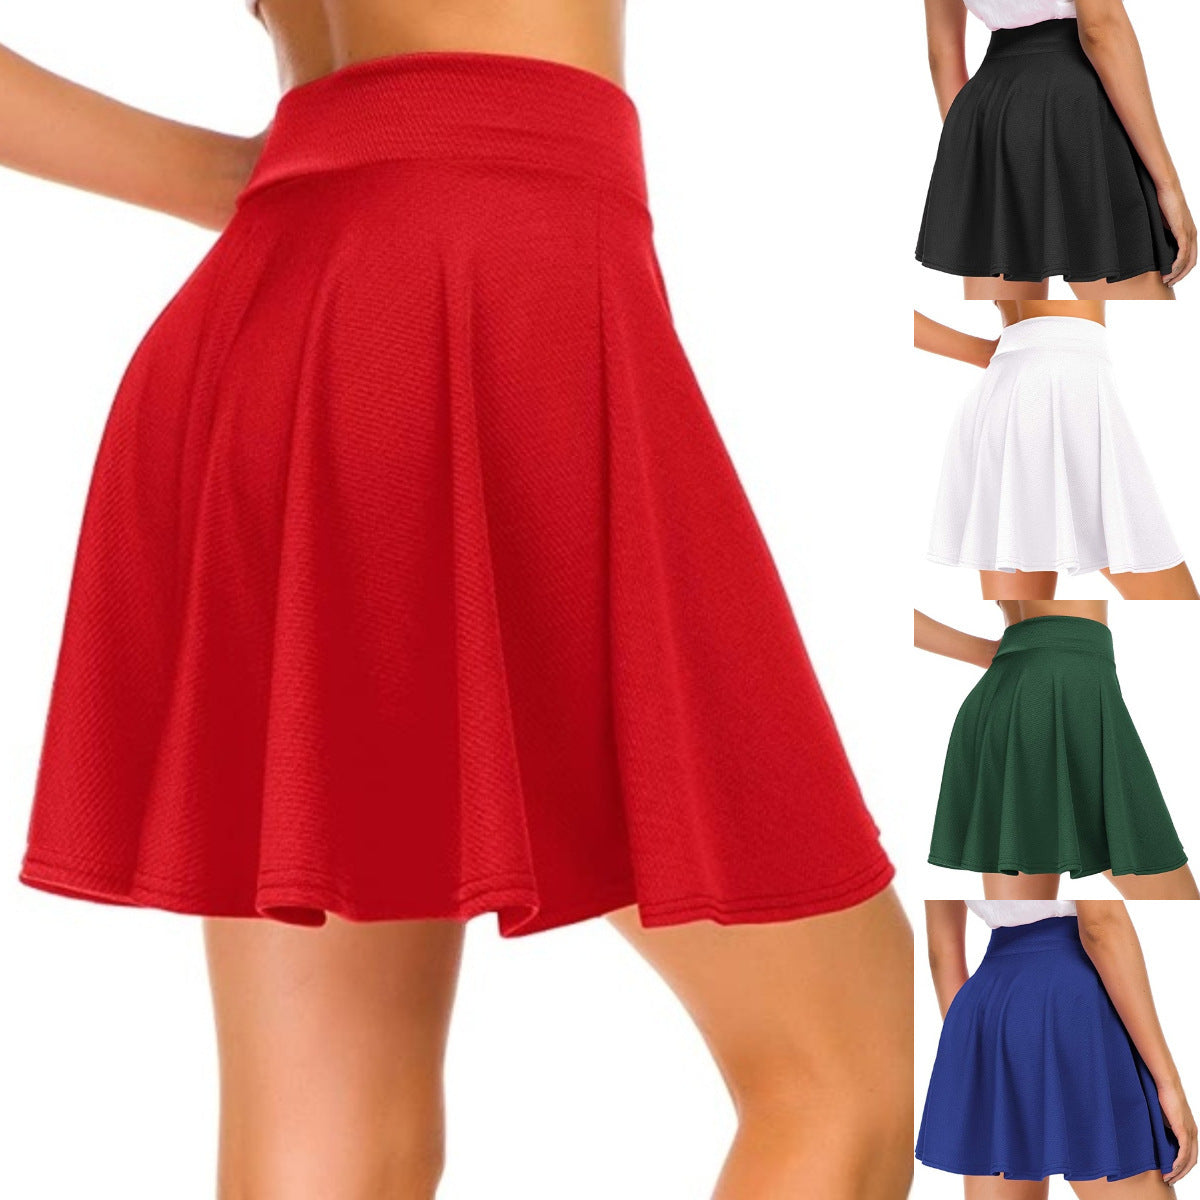 Women's Basic Style Solid Color Casual Skirts